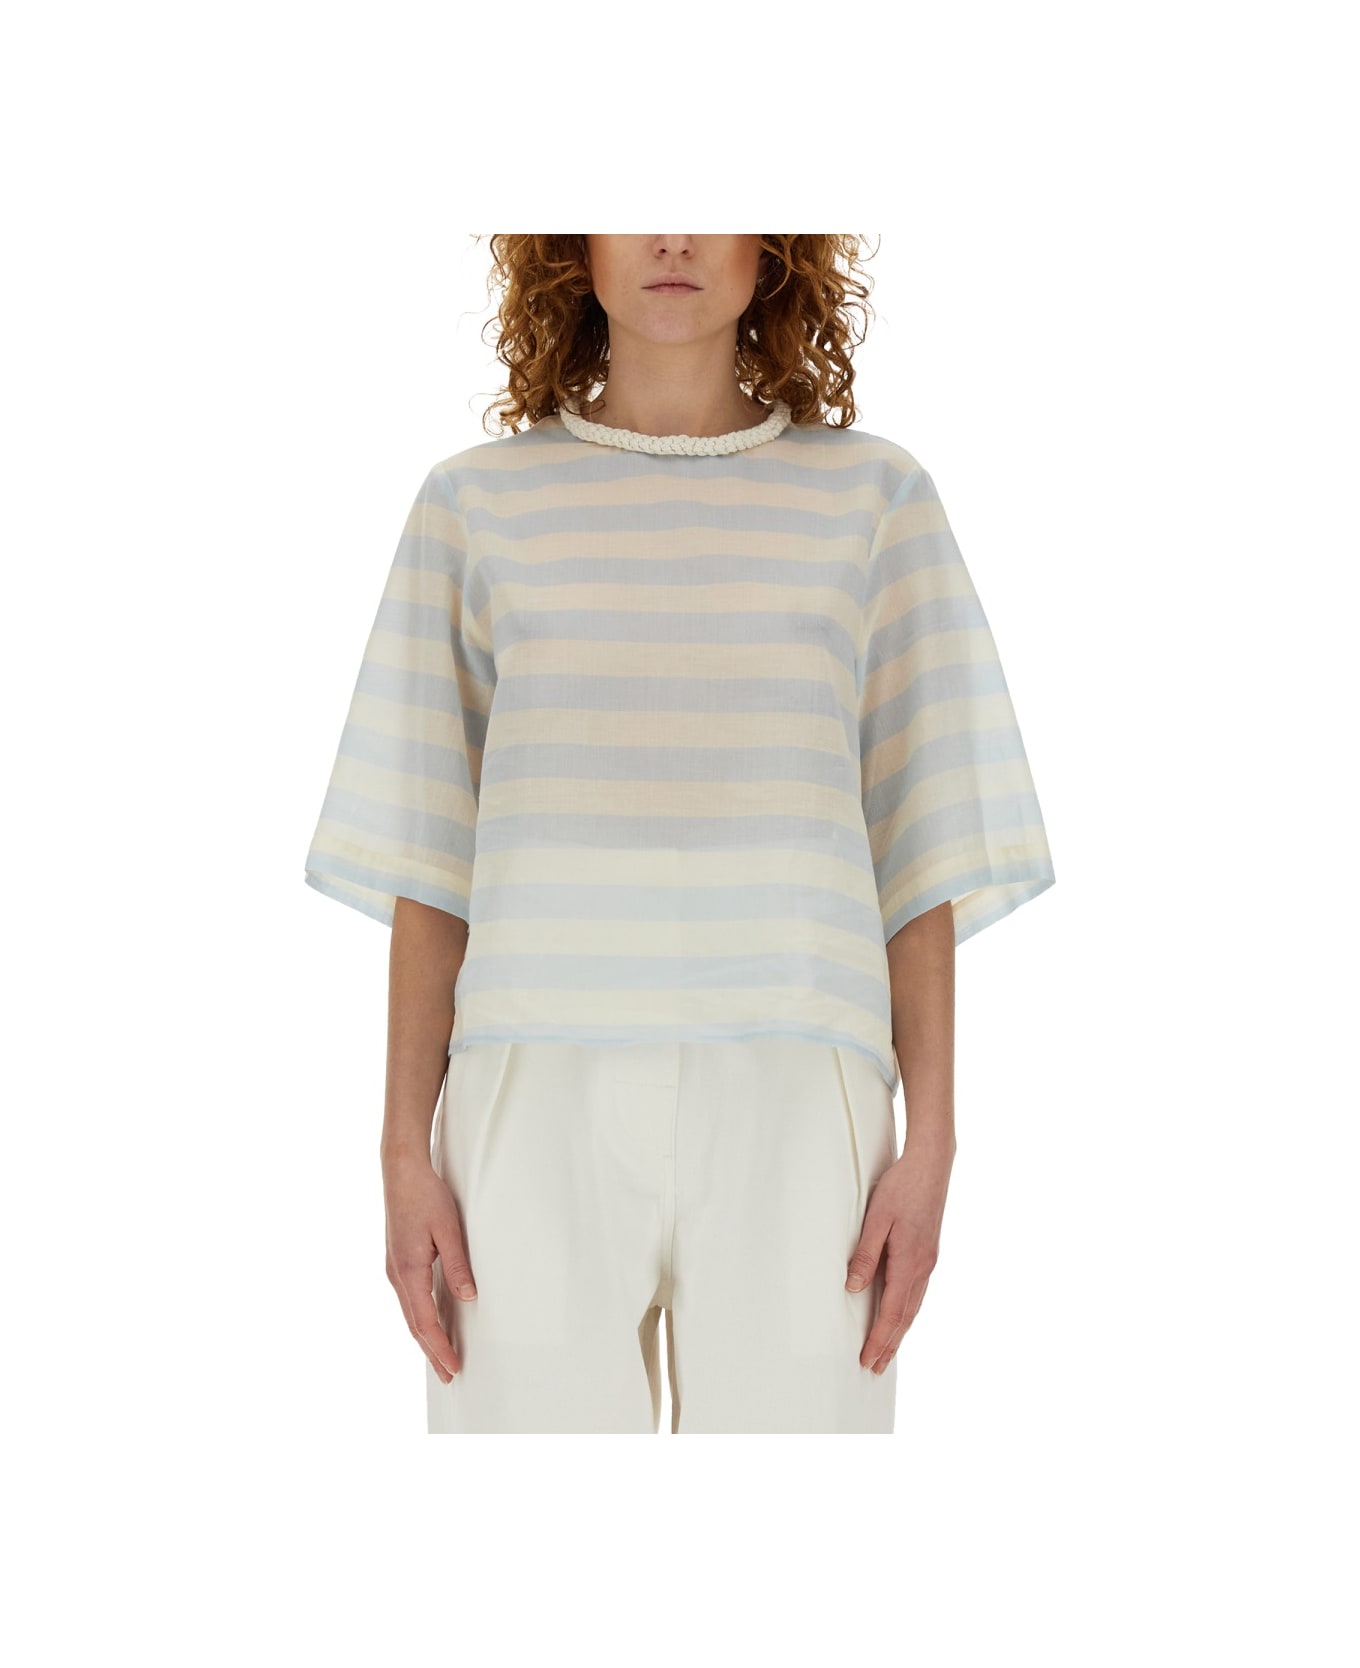 Alysi Striped Tops. - BABY BLUE